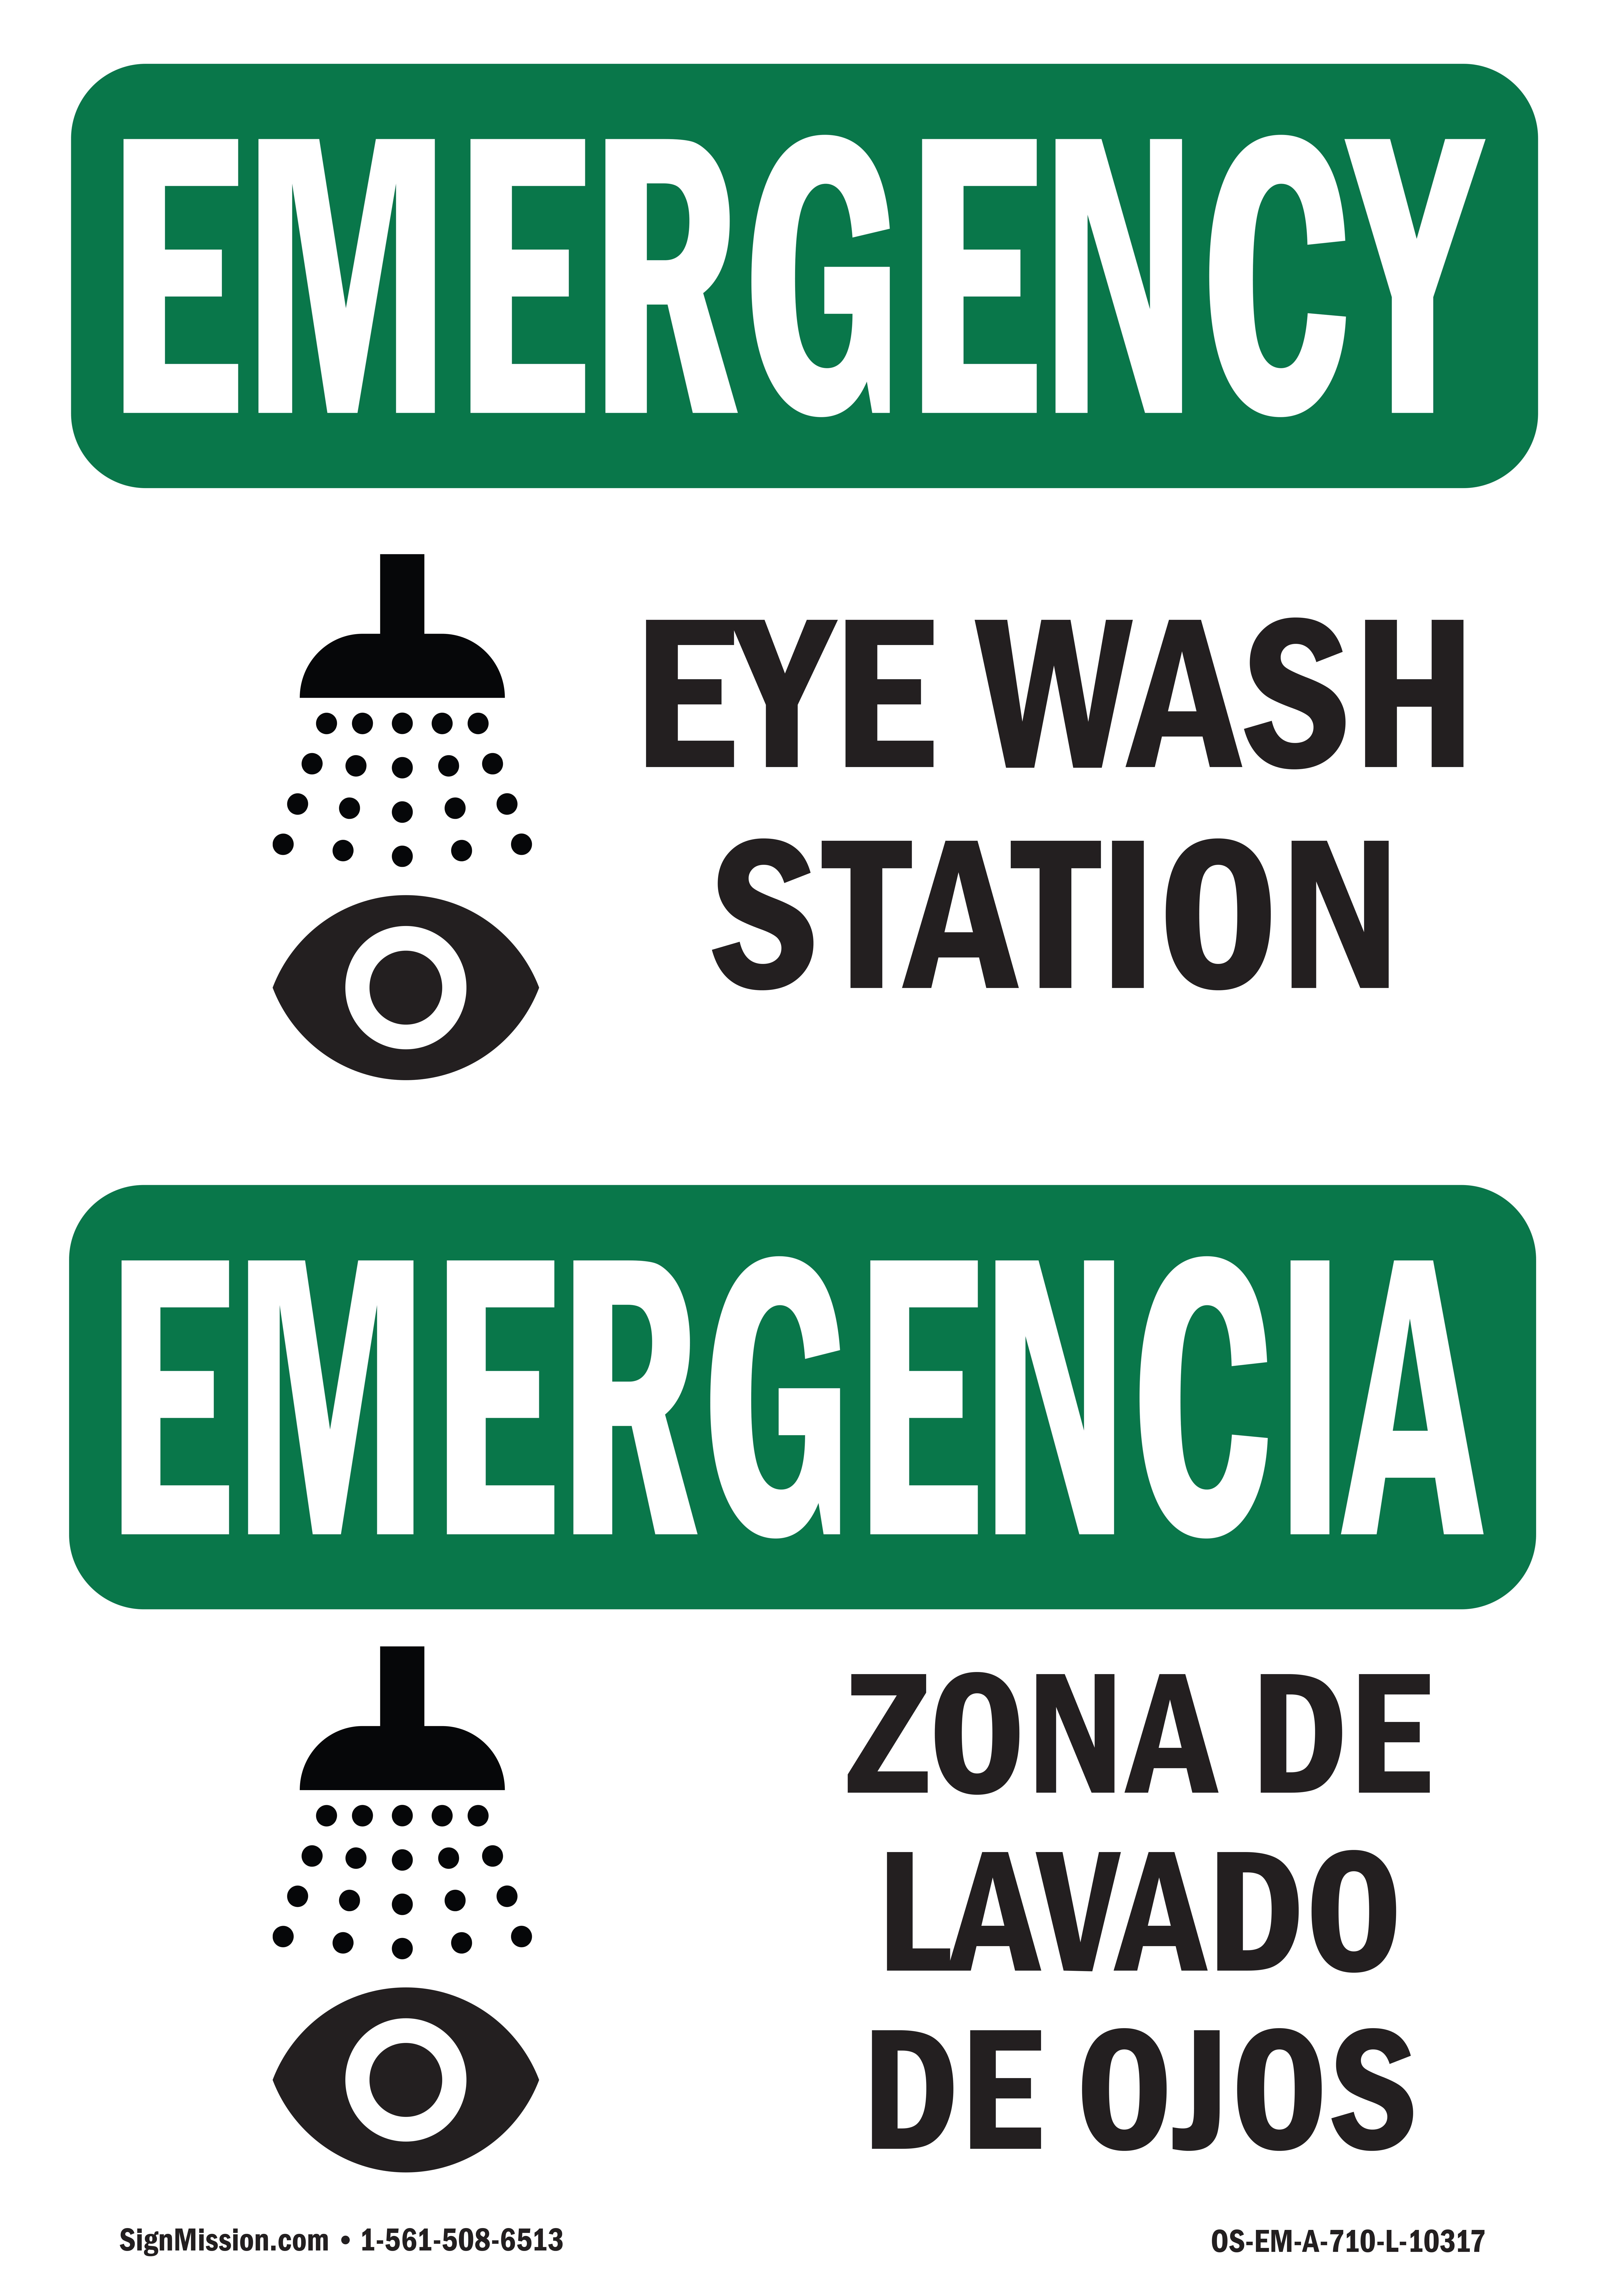 Keep your eyewash station visible. Use a eye wash station sign.  Demonstrate your commitment to safety. - A graphic gets attention and makes  your